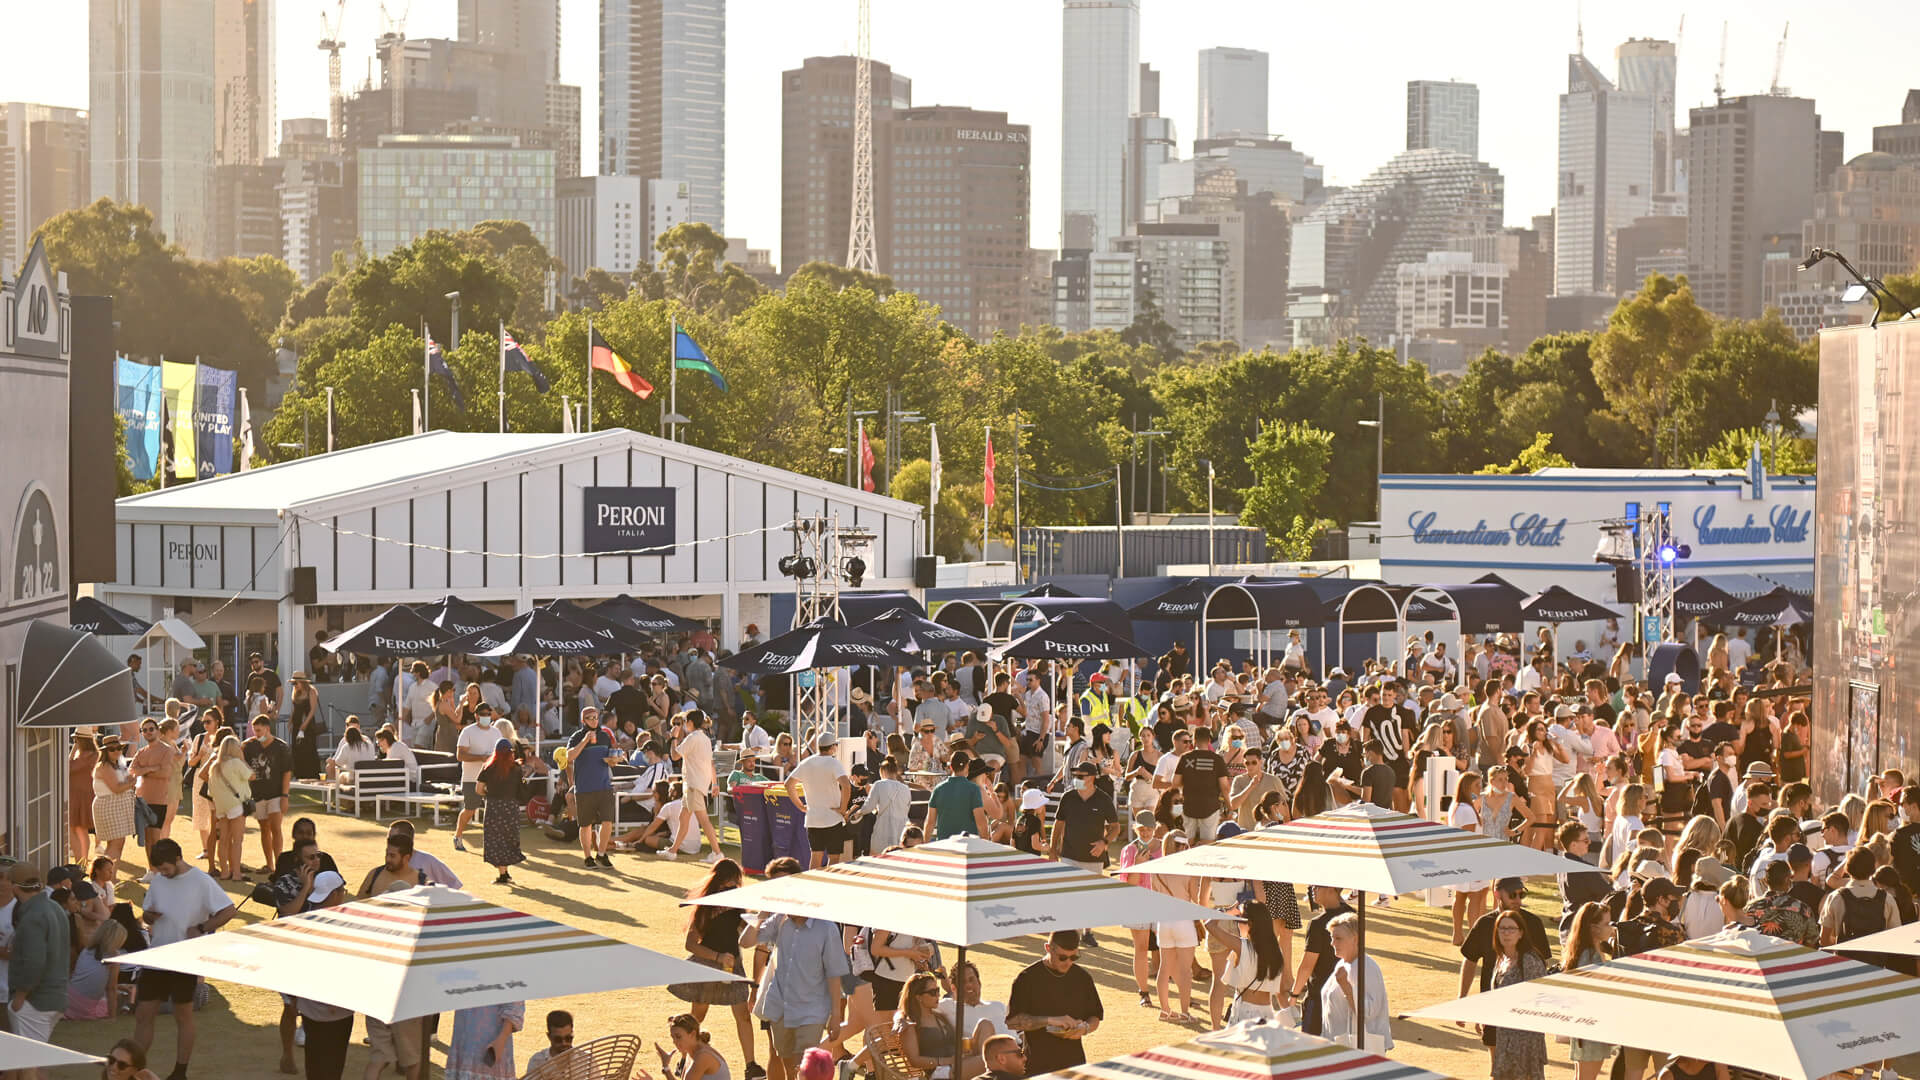 Melbourne & Olympic Parks and Tennis Australia call on innovative caterers